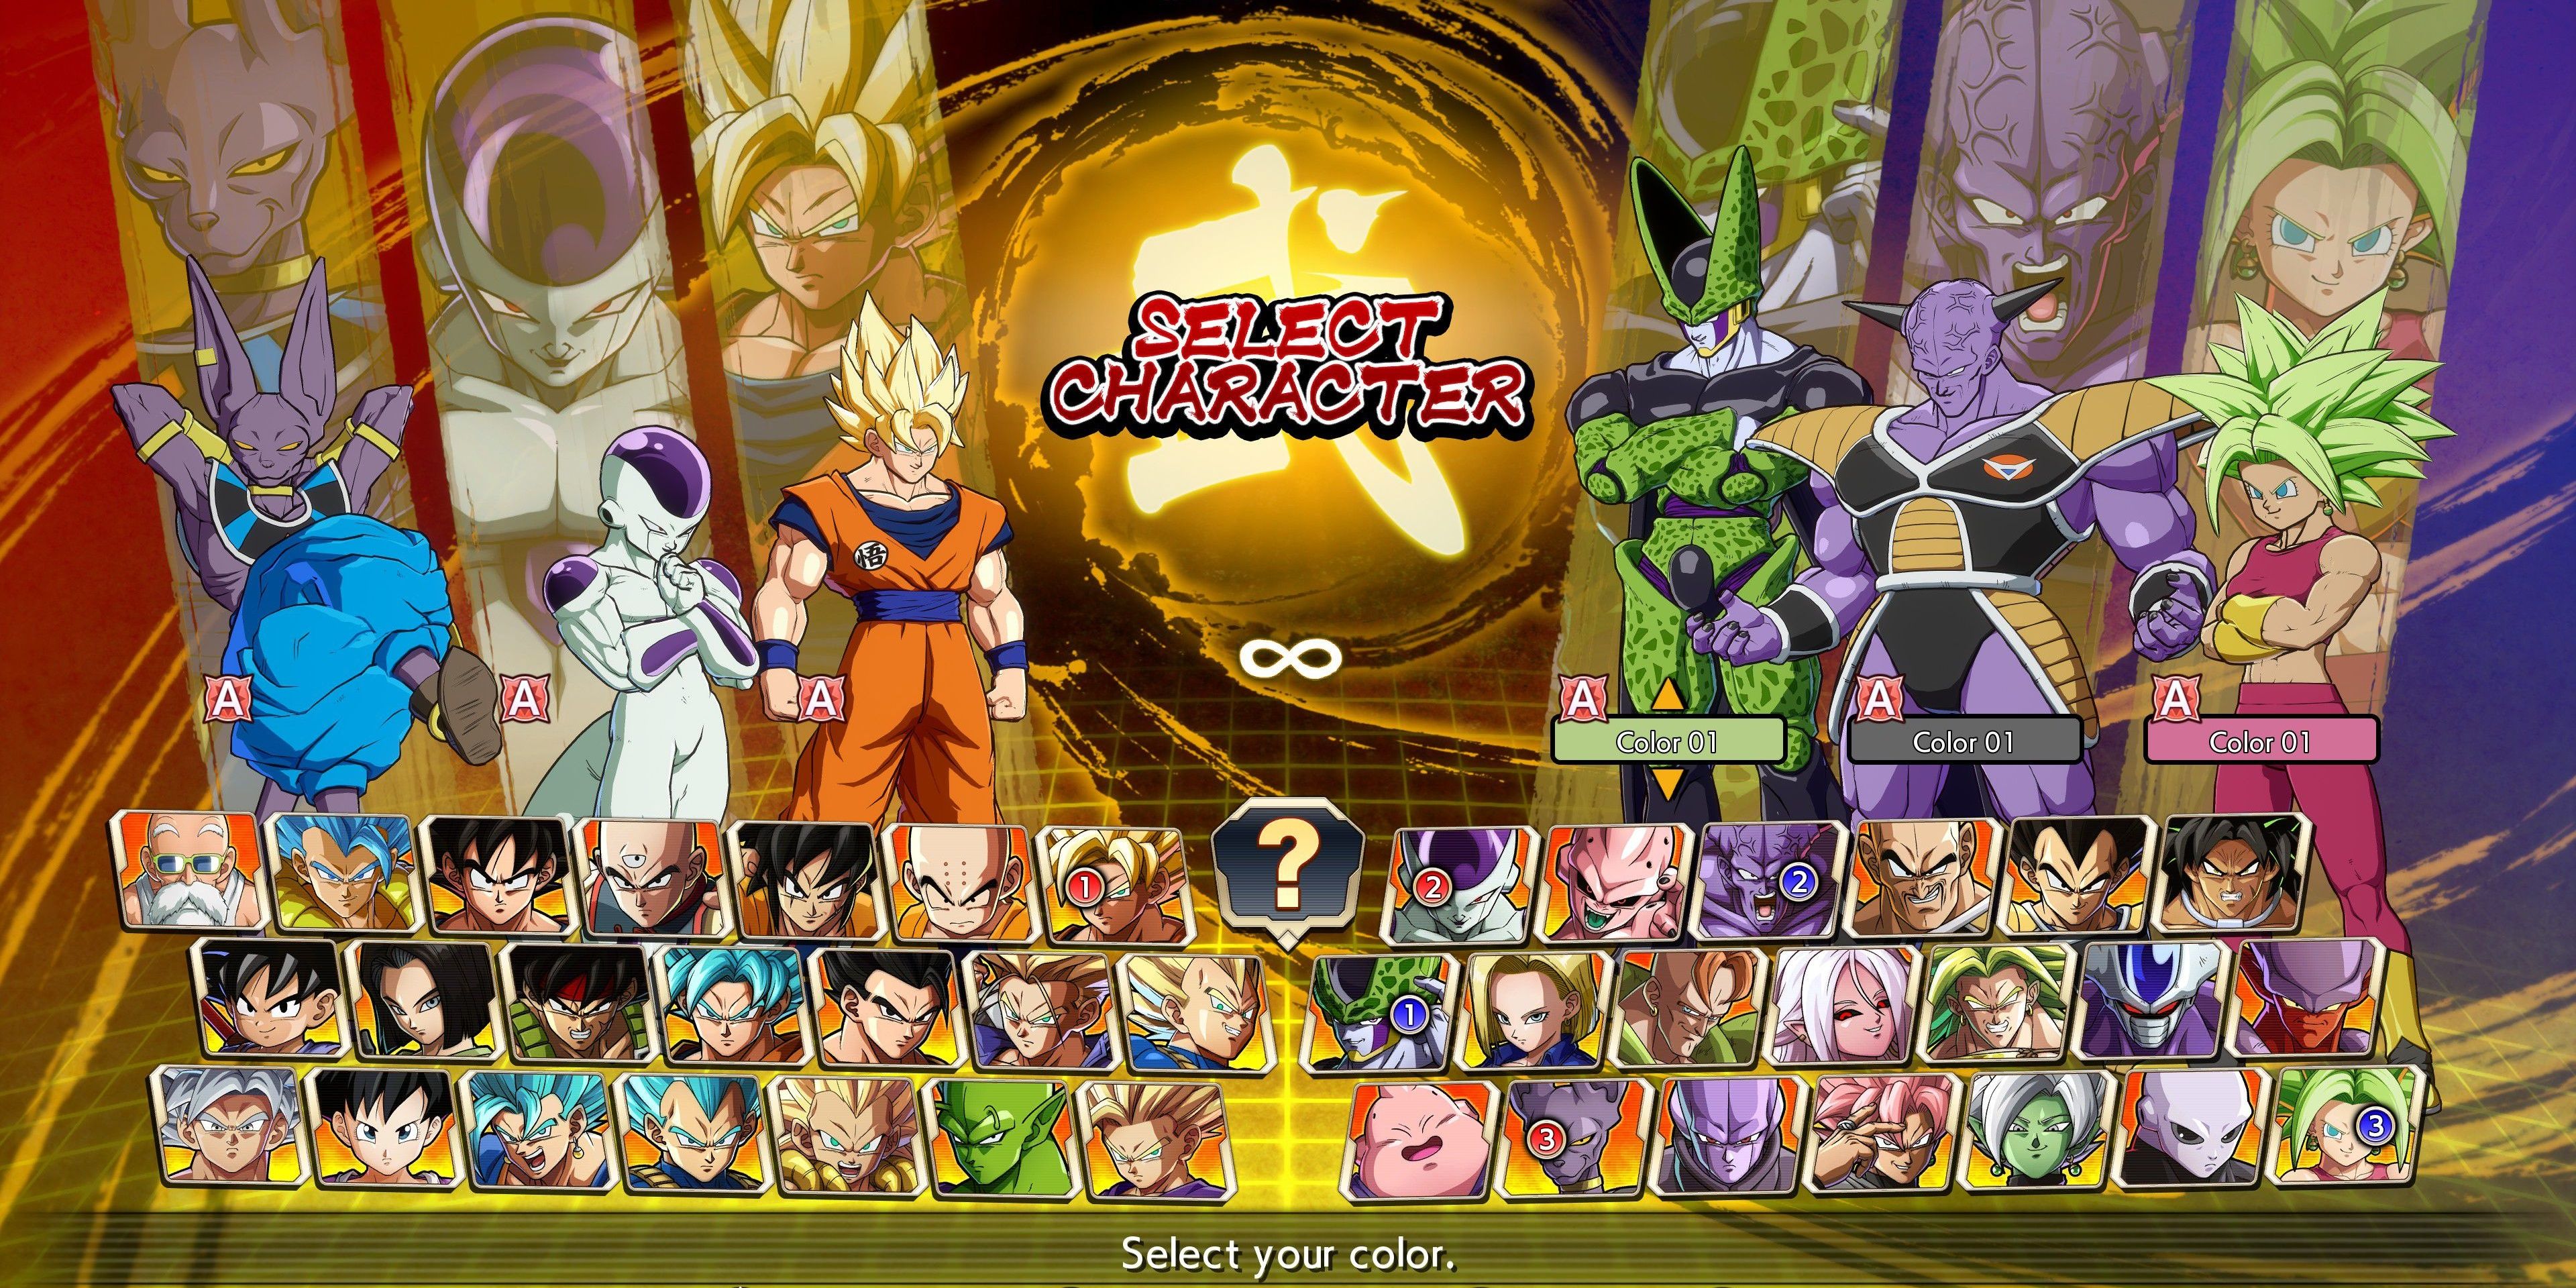 The roster screen in Dragon Ball FigherZ